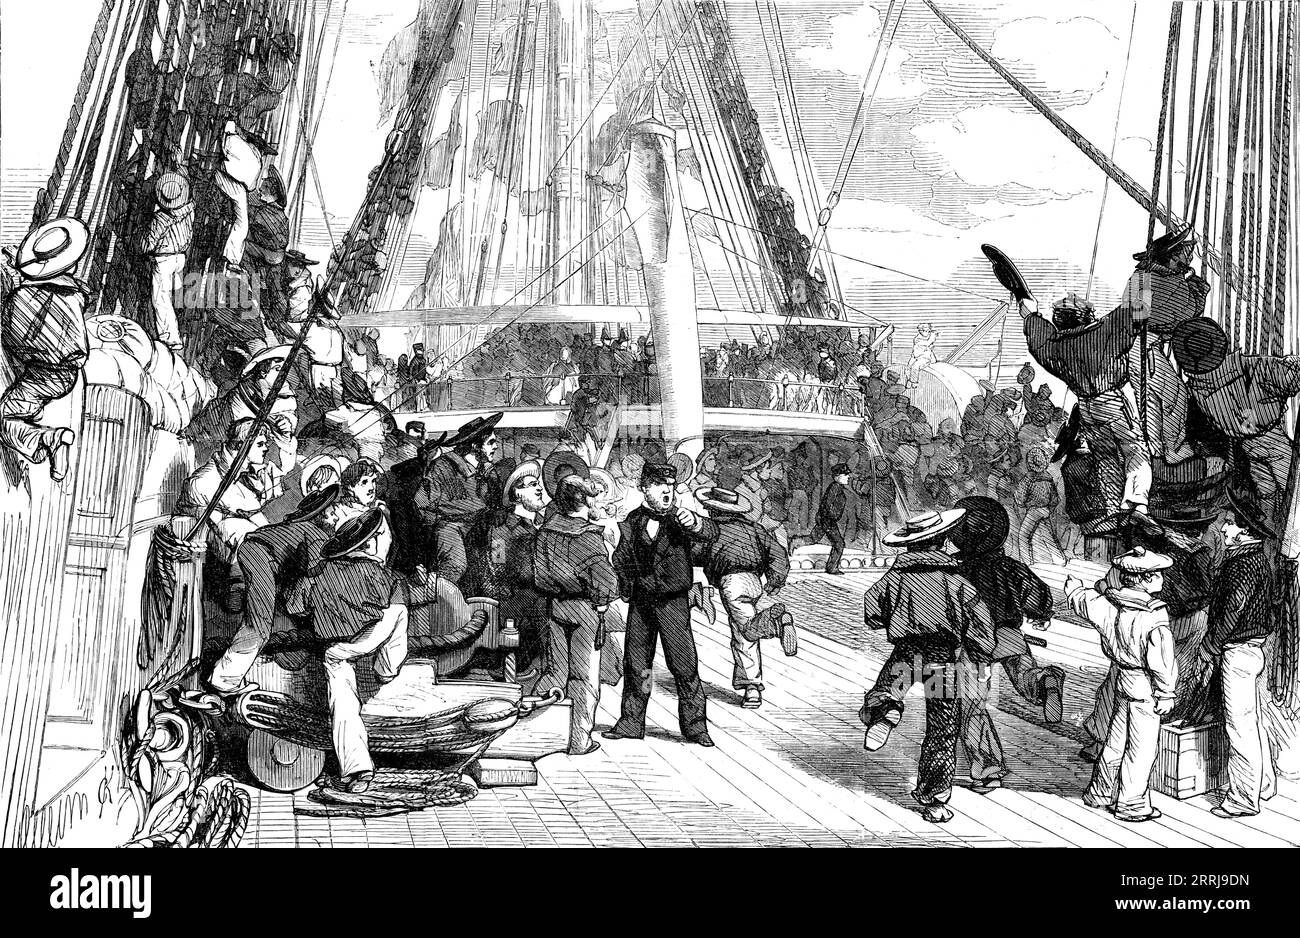 The Queen's Visit to Cherbourg - Piping Hands to Man Yards, 1858. One of the most exciting and agreeable sights that takes place on a vessel of war...When the boatswain pipes to man yards, the Jacks, all eager and willing to obtain the loftiest and most important position on the yards or shrouds, answer this call with the greatest alacrity...The following exciting scene occurred with the fleet at Spithead on the occasion of her Majesty's presence before her departure for Cherbourg: All at once the sailors could be seen swarming up the shrouds like bees, covering the rigging as they mounted hig Stock Photo